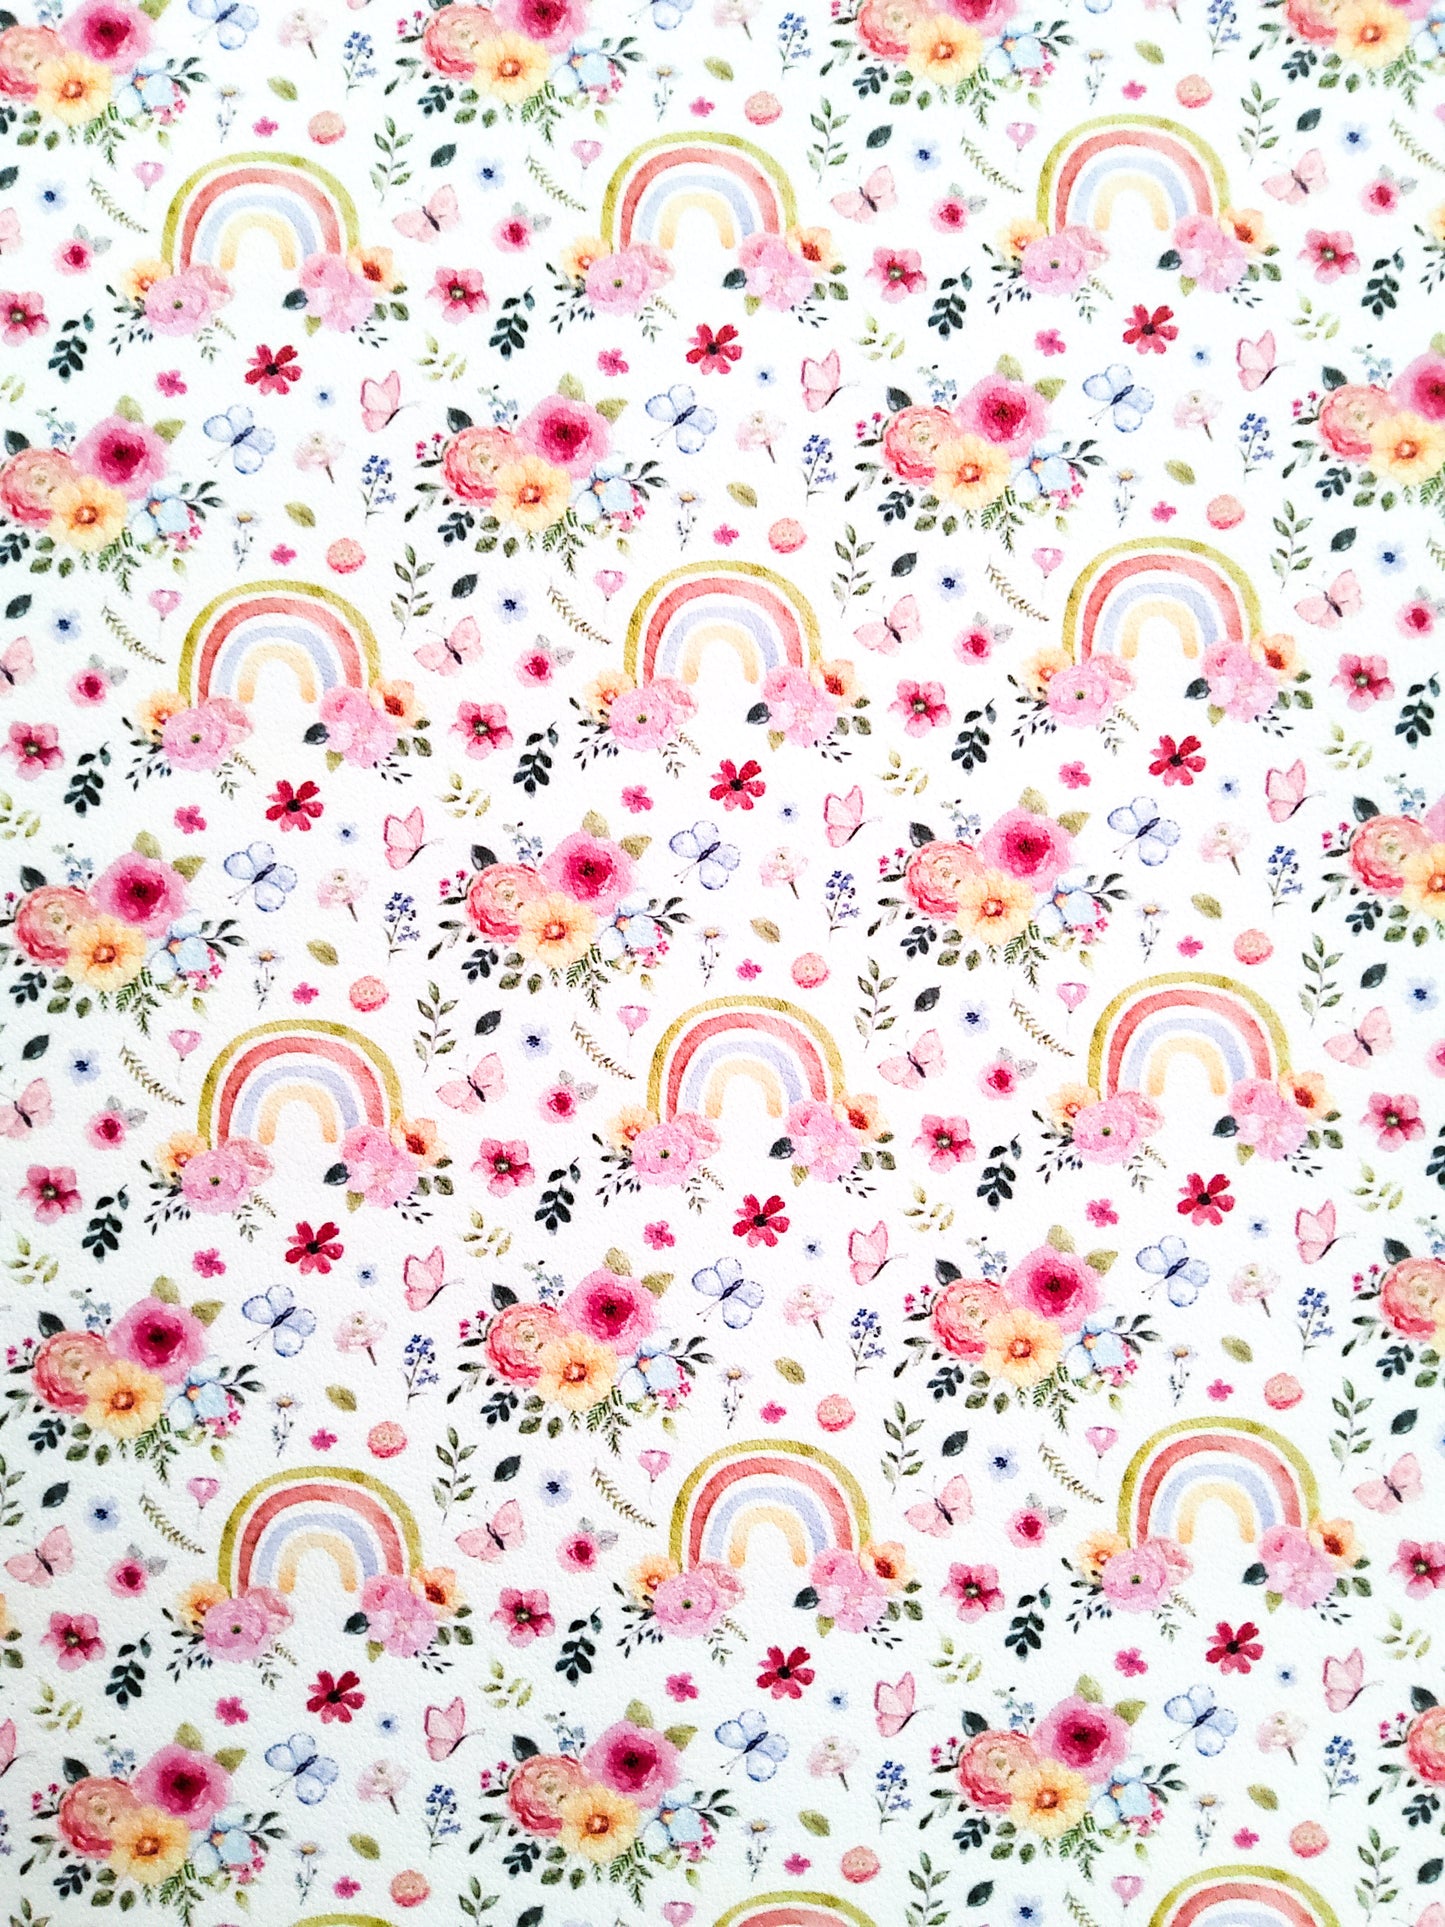 Floral Rainbows and Butterflies 9x12 faux leather sheet